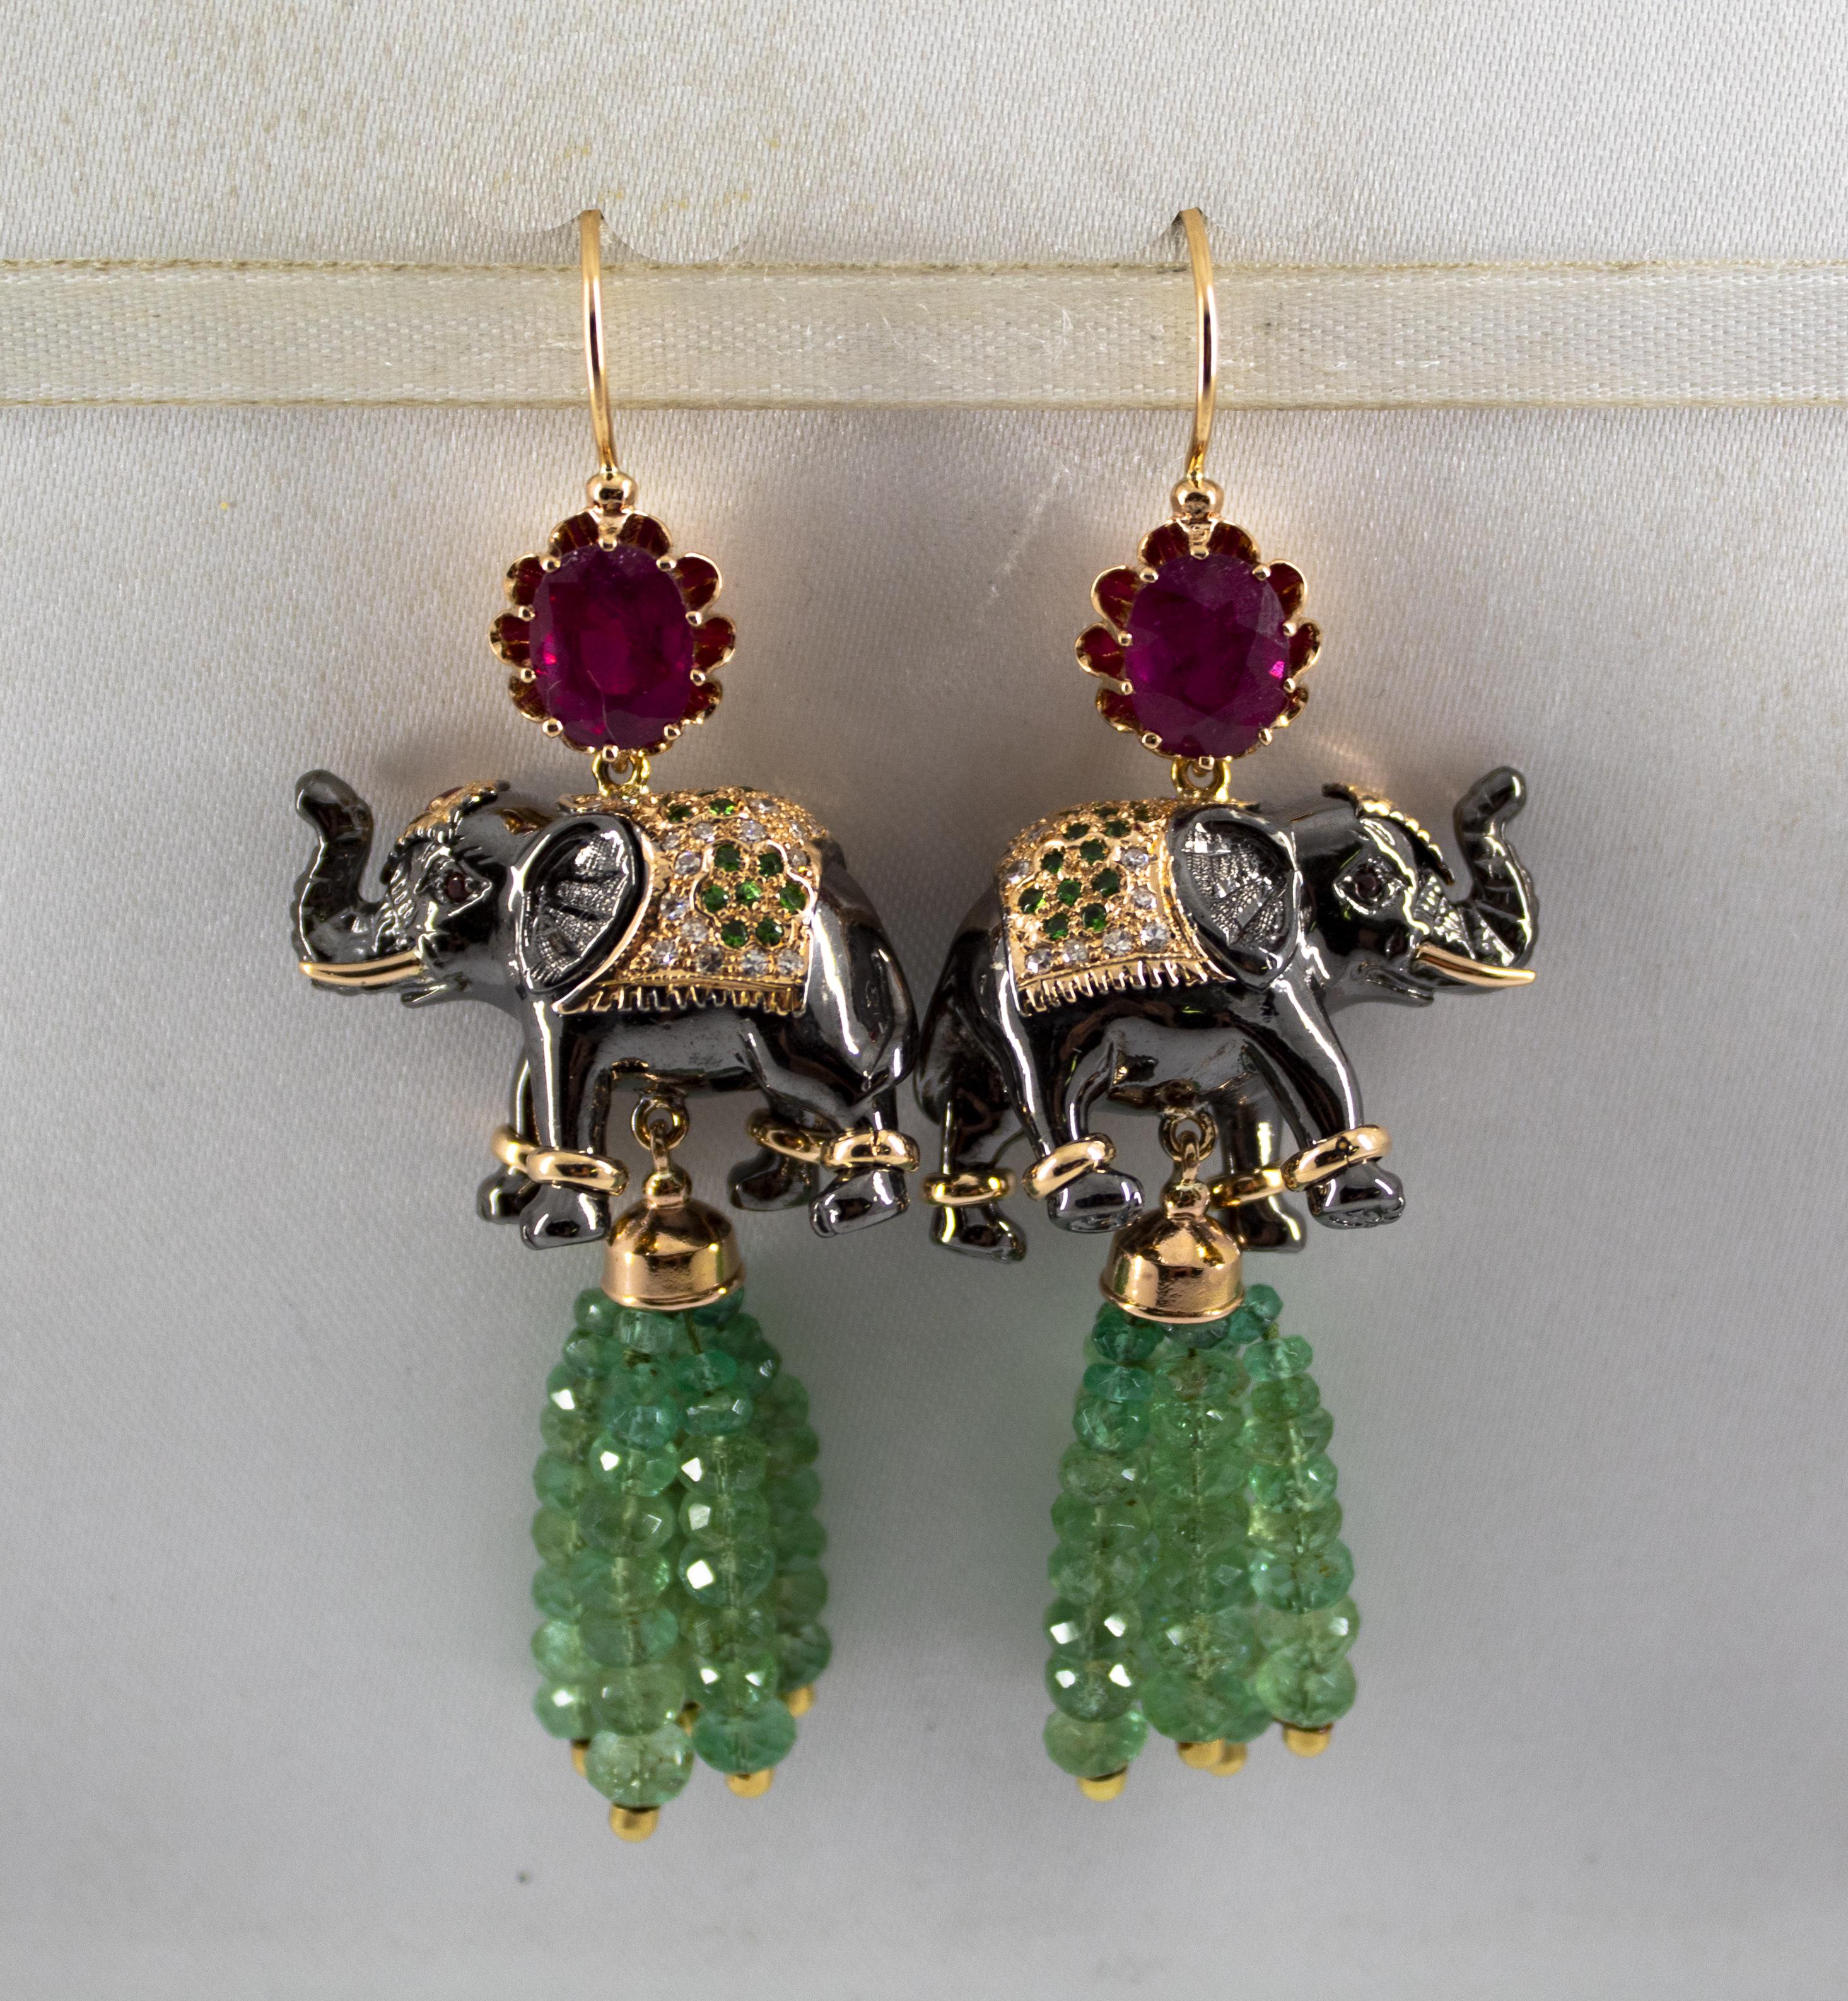 These Stud Elephant Earrings are made of 14K Yellow Gold and Sterling Silver.
These Earrings have 0.70 Carats of Diamonds.
These Earrings have 35.00 Carats of Emeralds.
These Earrings have 6.20 Carats of Rubies.
These Earrings have 0.60 Carats of